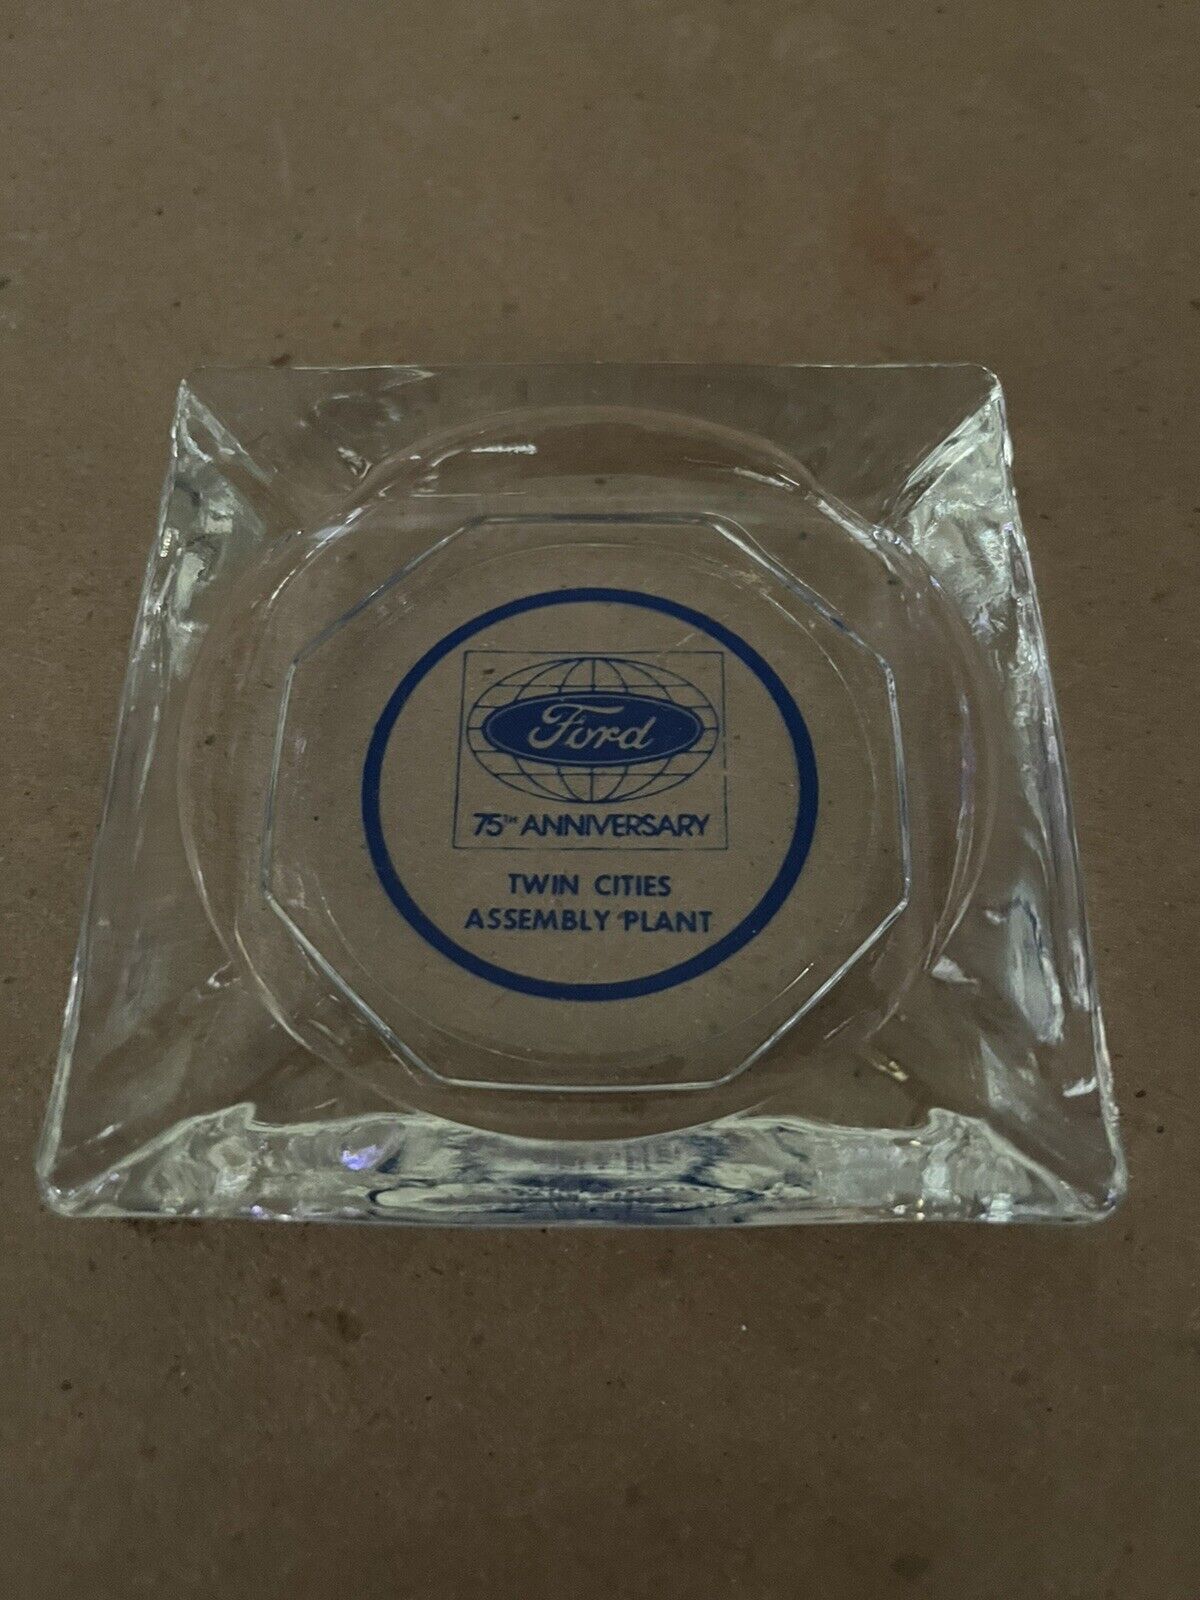 FORD 75 Th Anniversary ACL GLASS ASHTRAY Twin Cities Assembly Plant Automoblie